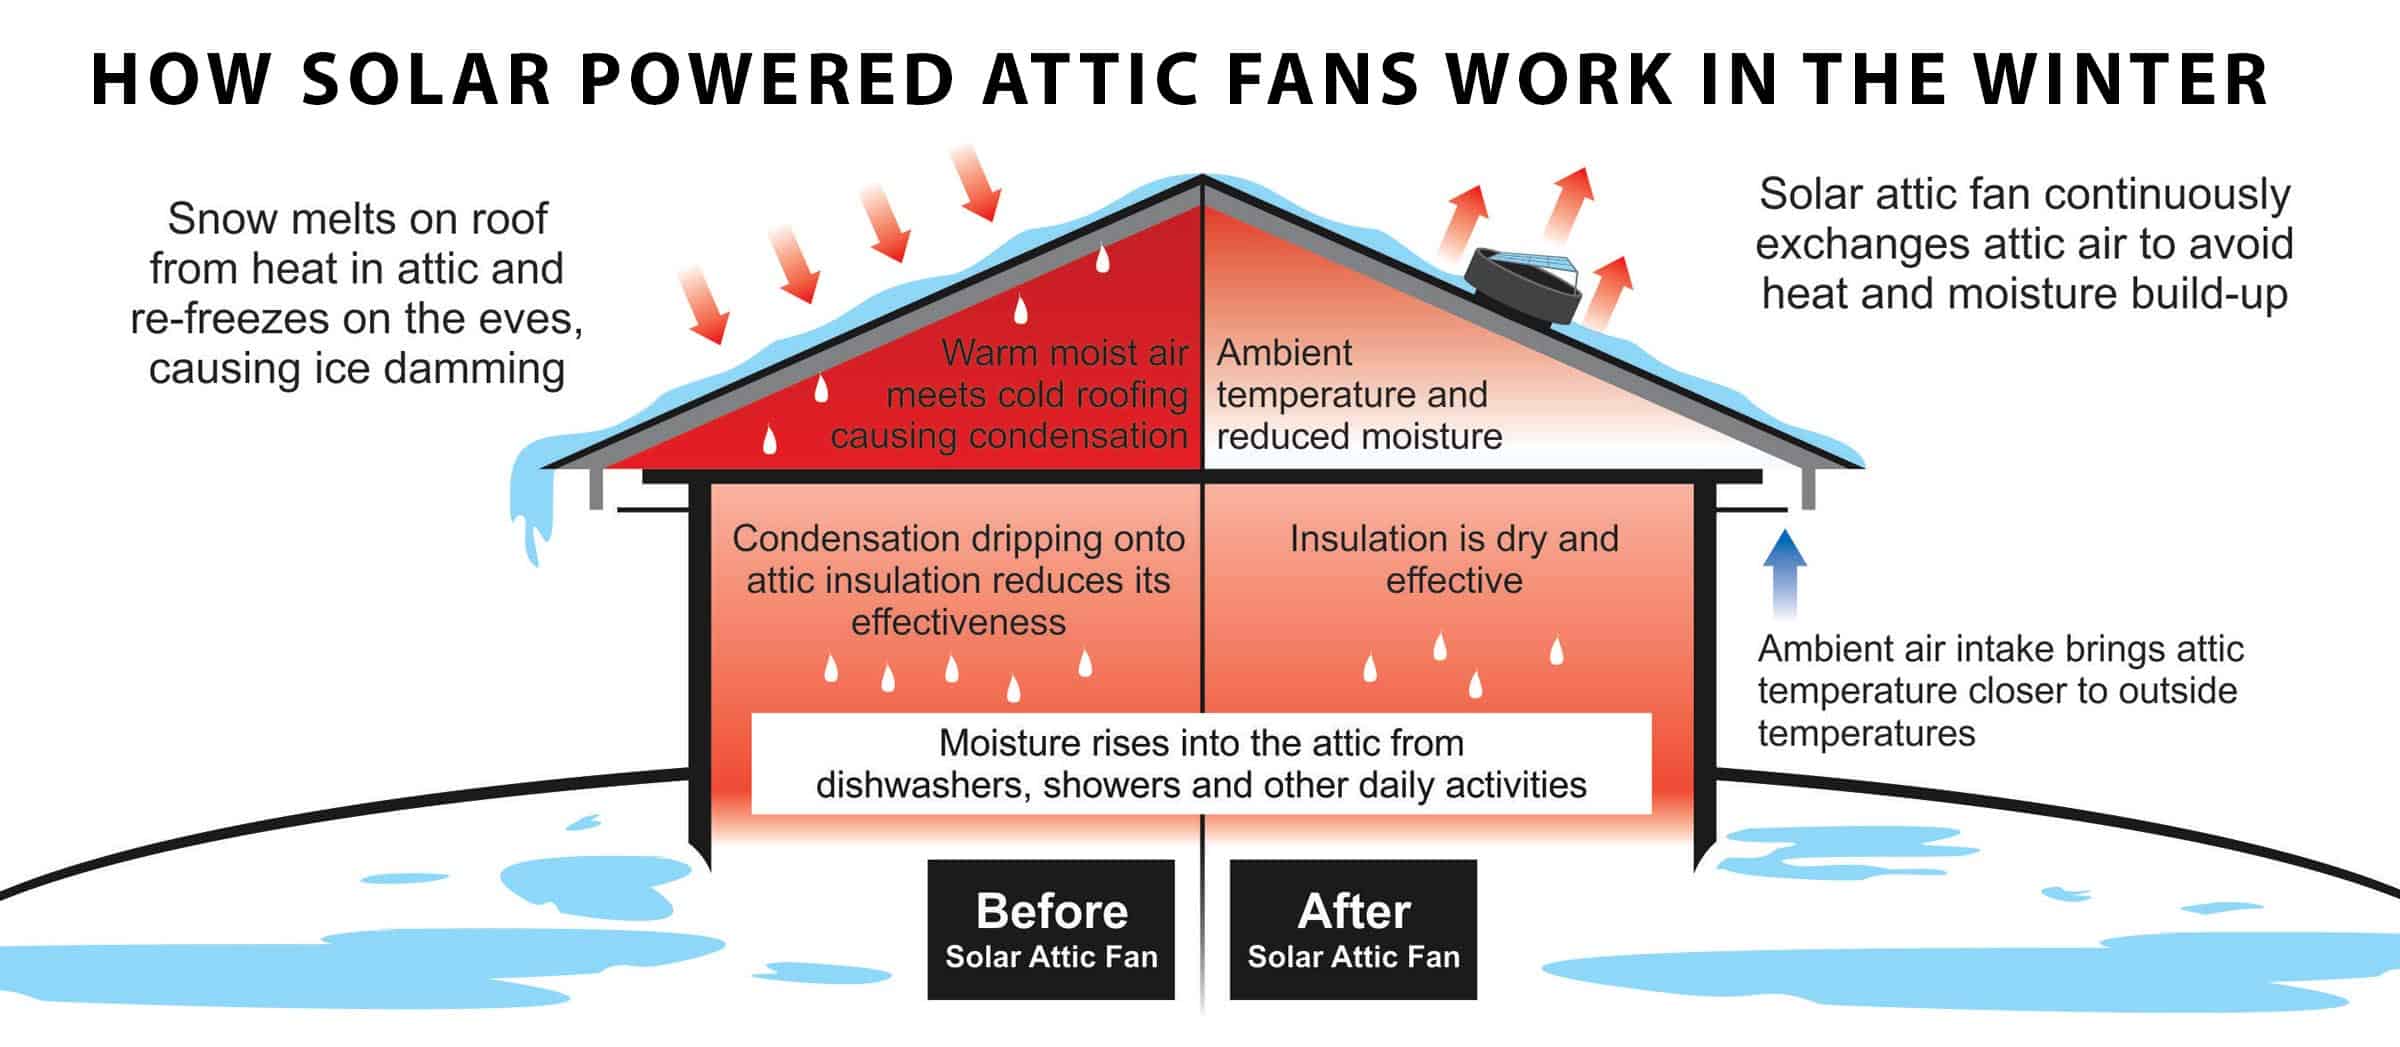 HOW SOLAR POWERED ATTIC FANS WORK IN THE WINTER